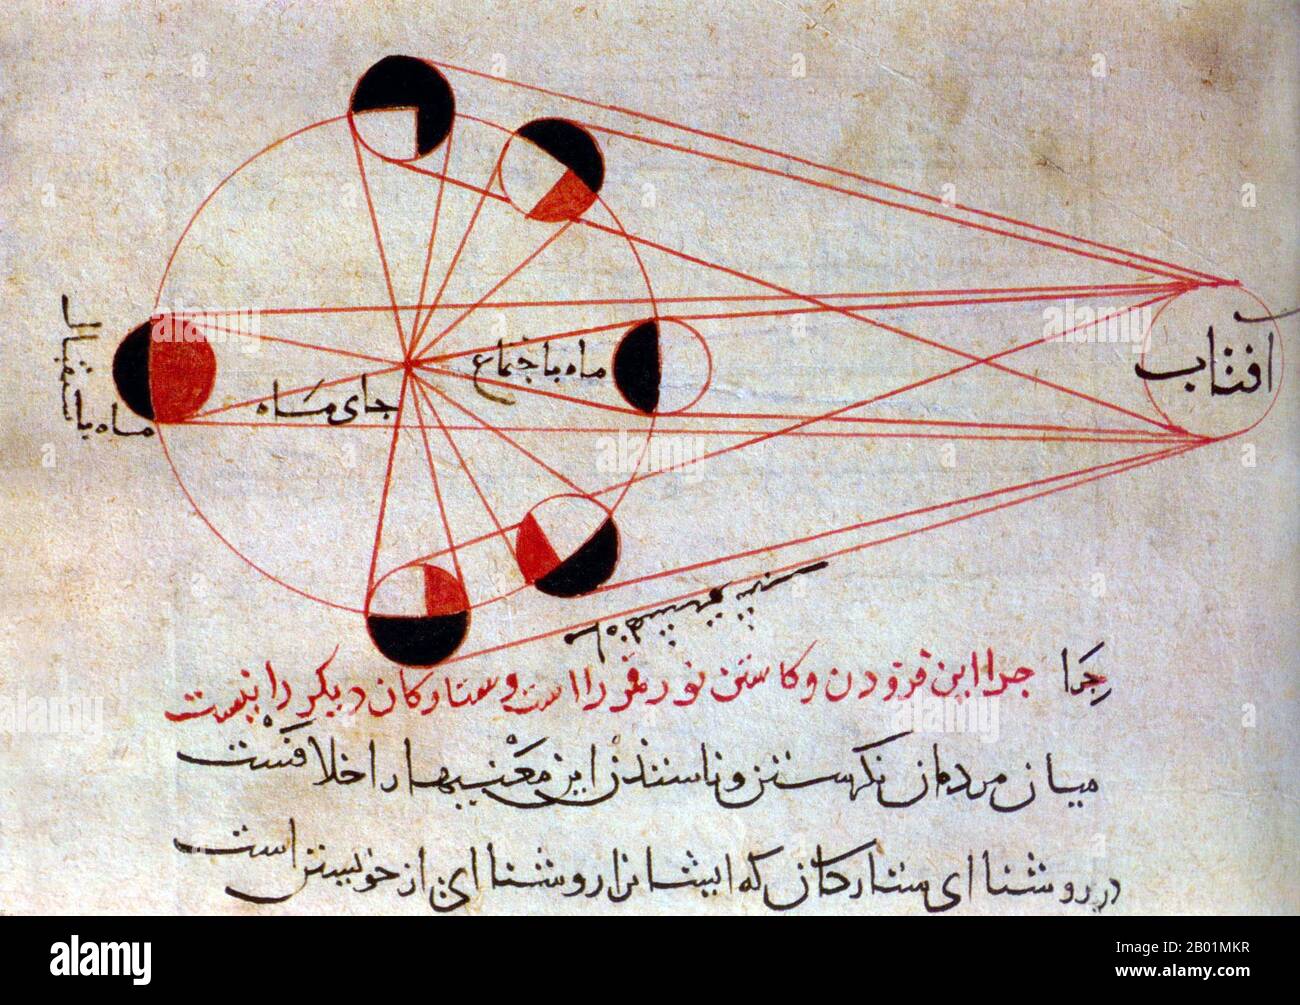 Iran/Afghanistan: Astronomical illustration explaining the different phases of the moon from a copy of the 'Kitab al-Tafhim' by Abu Rayhan Al-Biruni (4 September 973 - 9 December 1048). Gouache on paper, c. 1750.  Abū al-Rayḥān Muḥammad ibn Aḥmad al-Bīrūnī, known as Alberonius in Latin and Al-Biruni in English, was an Iranian- Khwarazmian Muslim scholar and polymath of the 11th century CE.  Al-Biruni is regarded as one of the greatest scholars of the medieval Islamic era and was well versed in physics, mathematics, astronomy, and natural sciences, and also distinguished himself as a historian. Stock Photo